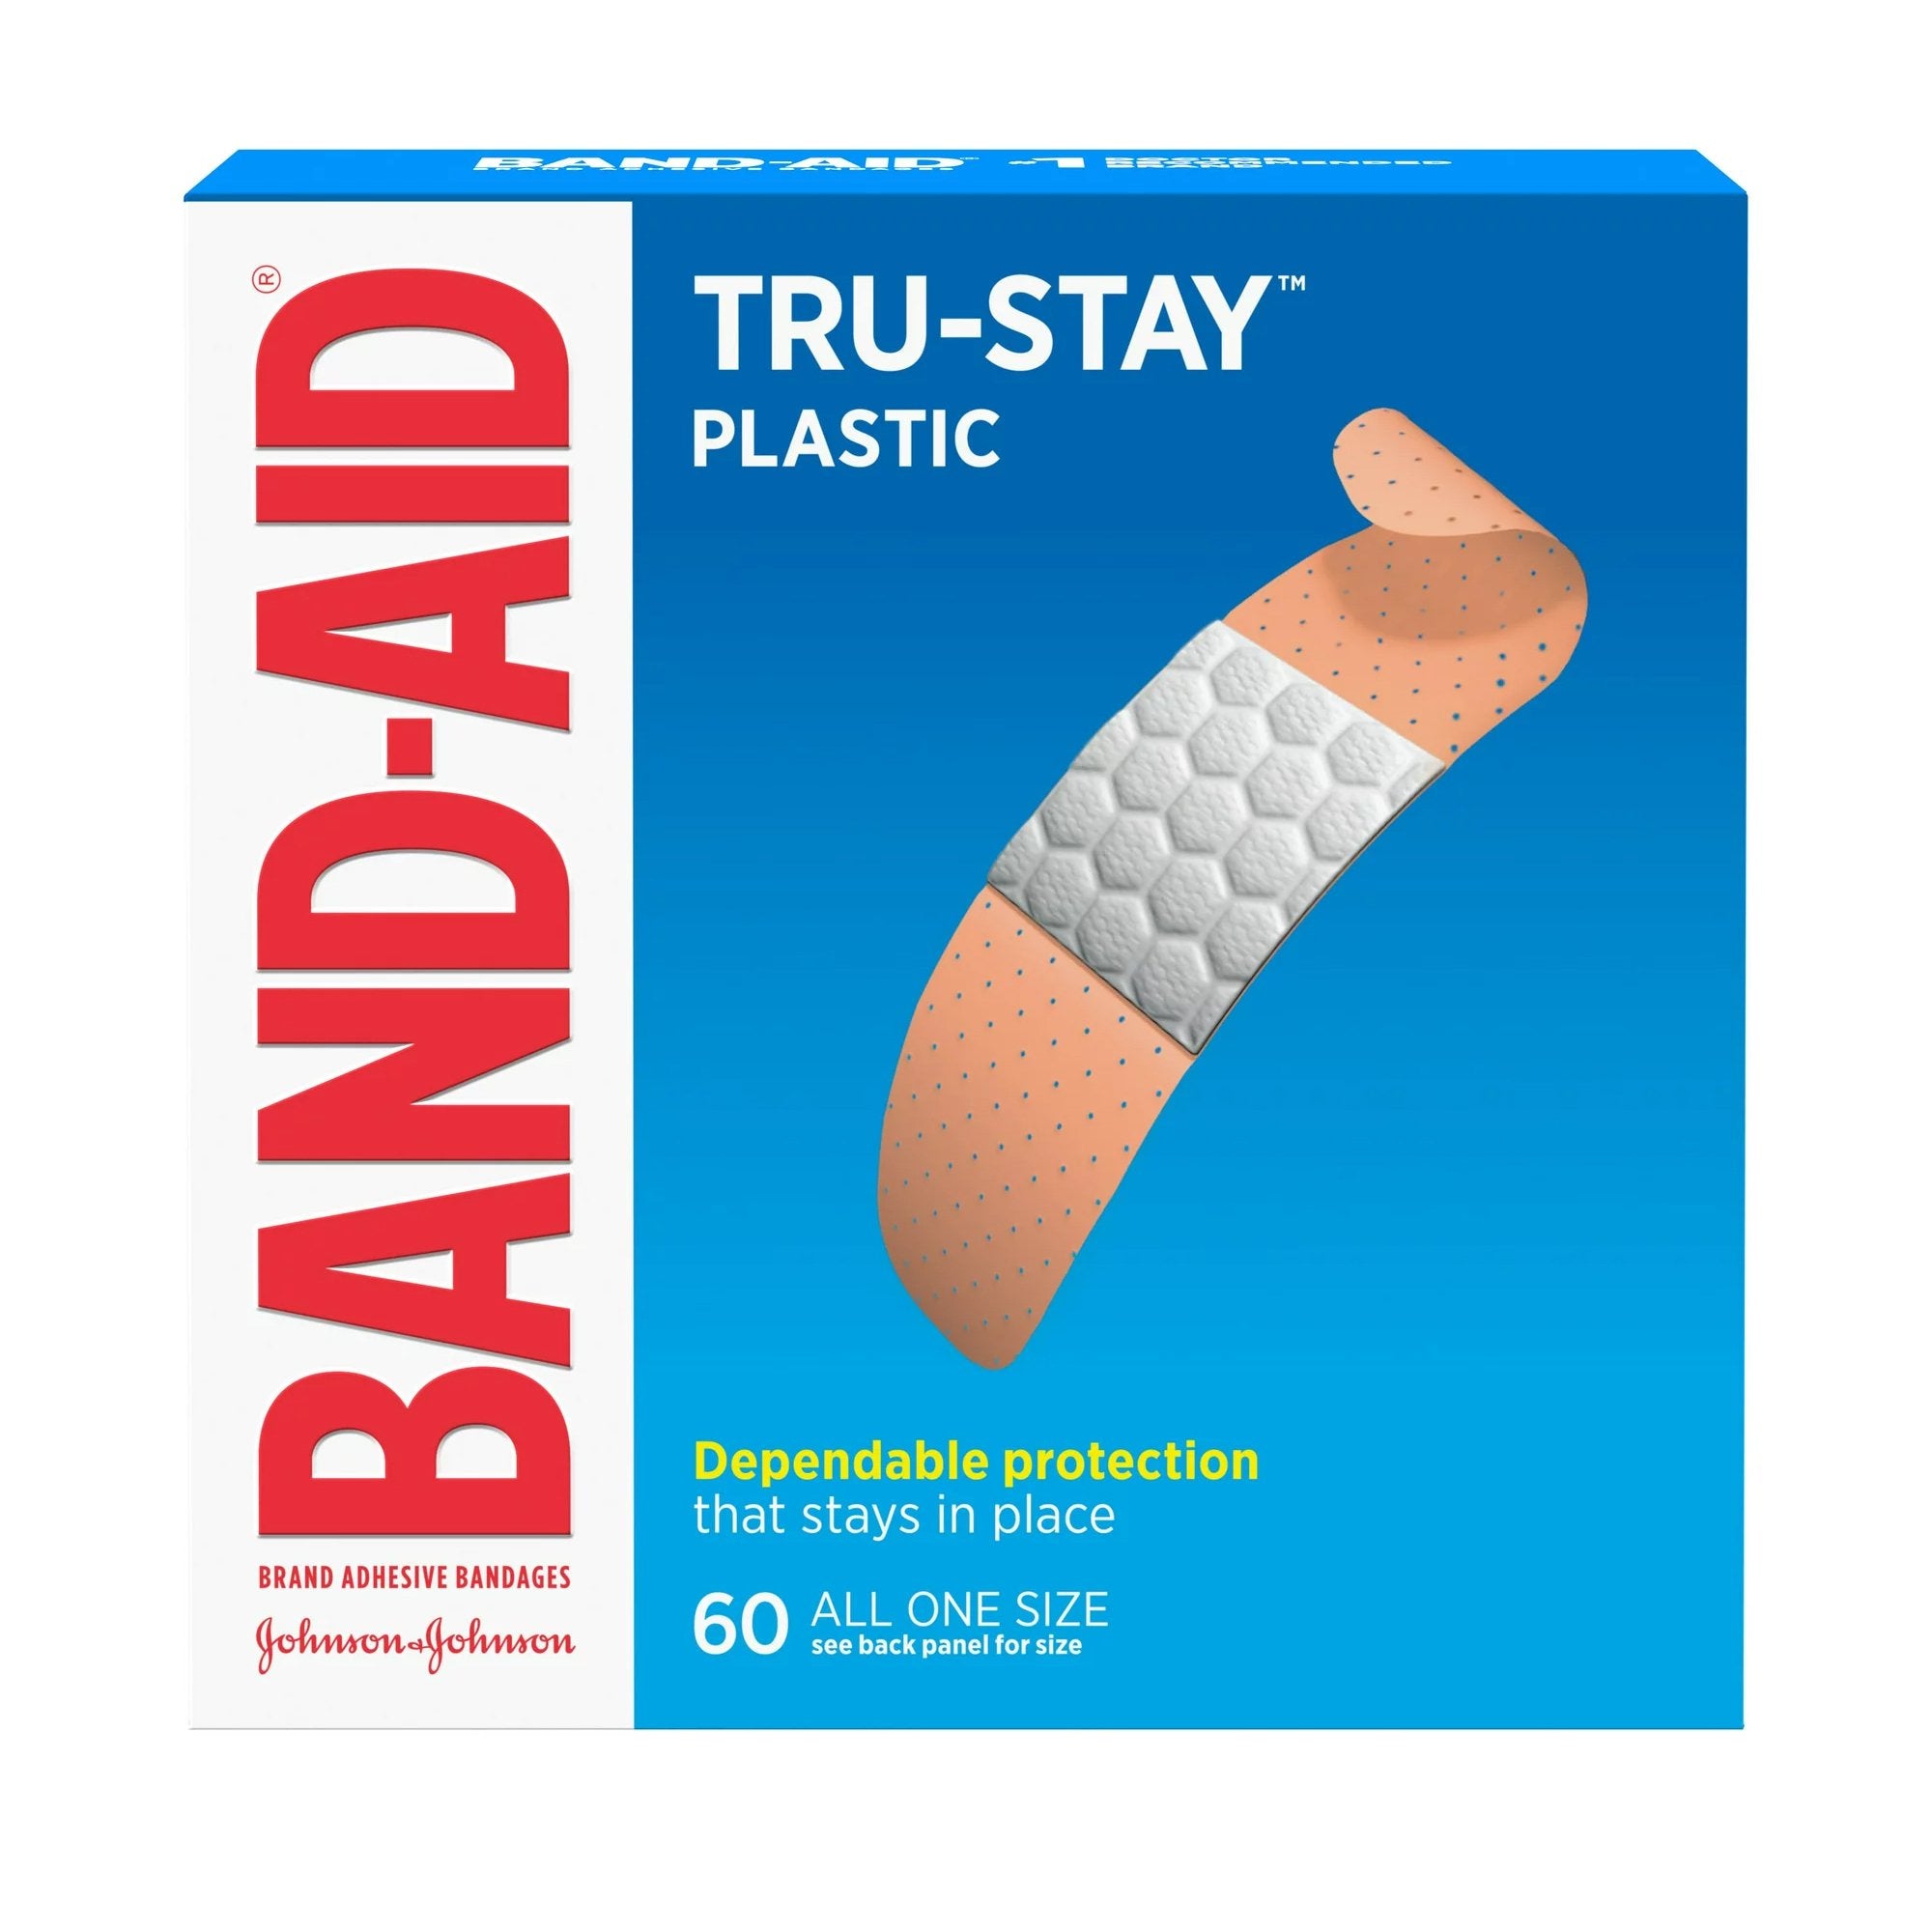 Adhesive Strip Band-Aid® Tru-Stay™ 3/4 X 3 Inch Plastic Rectangle Tan Sterile